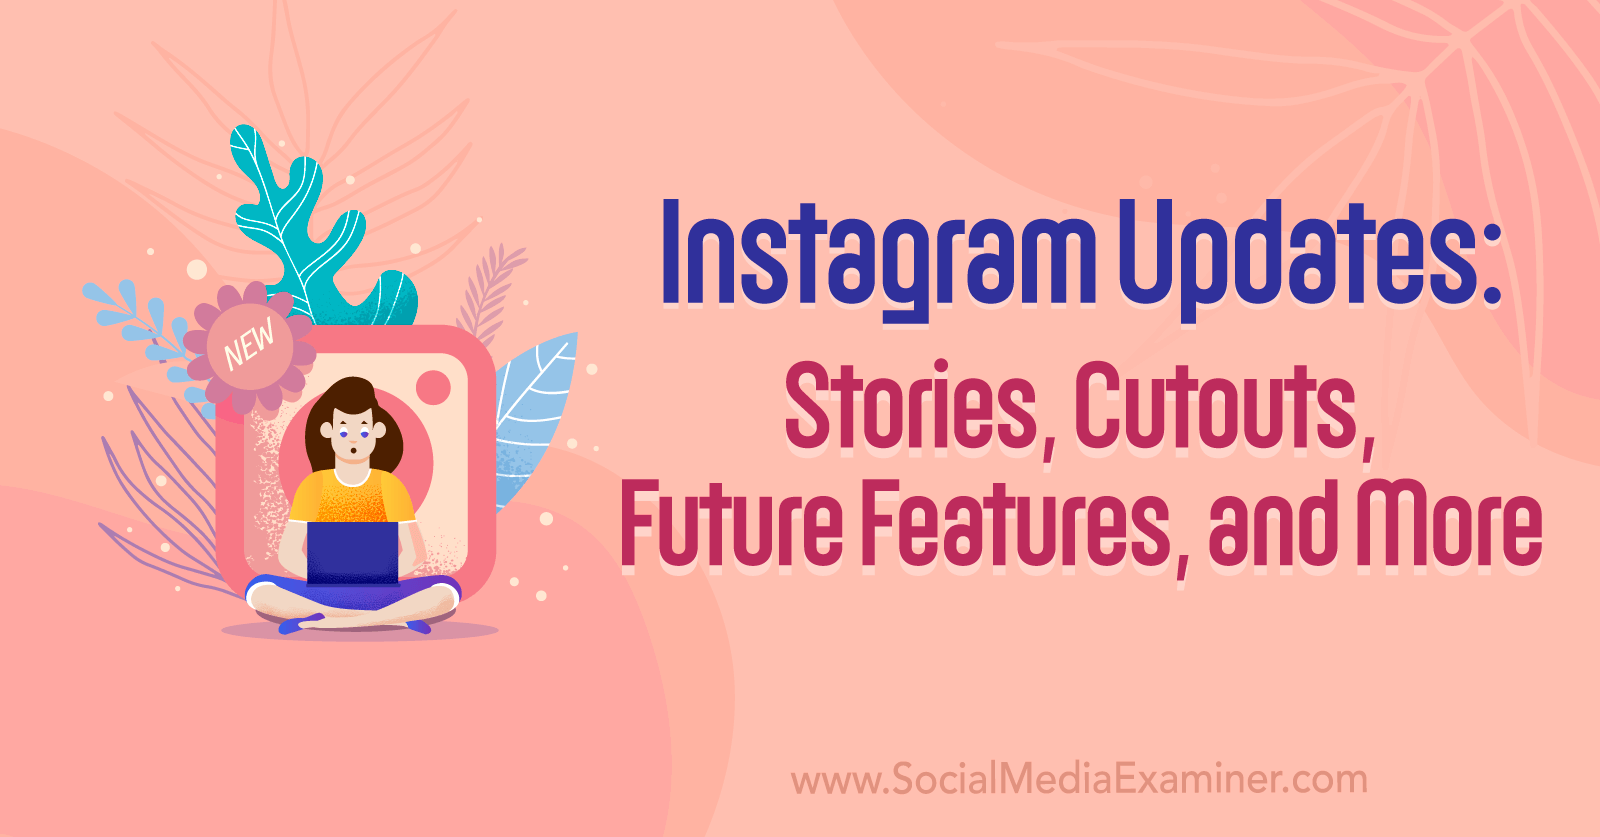 Instagram Updates: Stories, Cutouts, Future Features, and More by Social Media Examiner